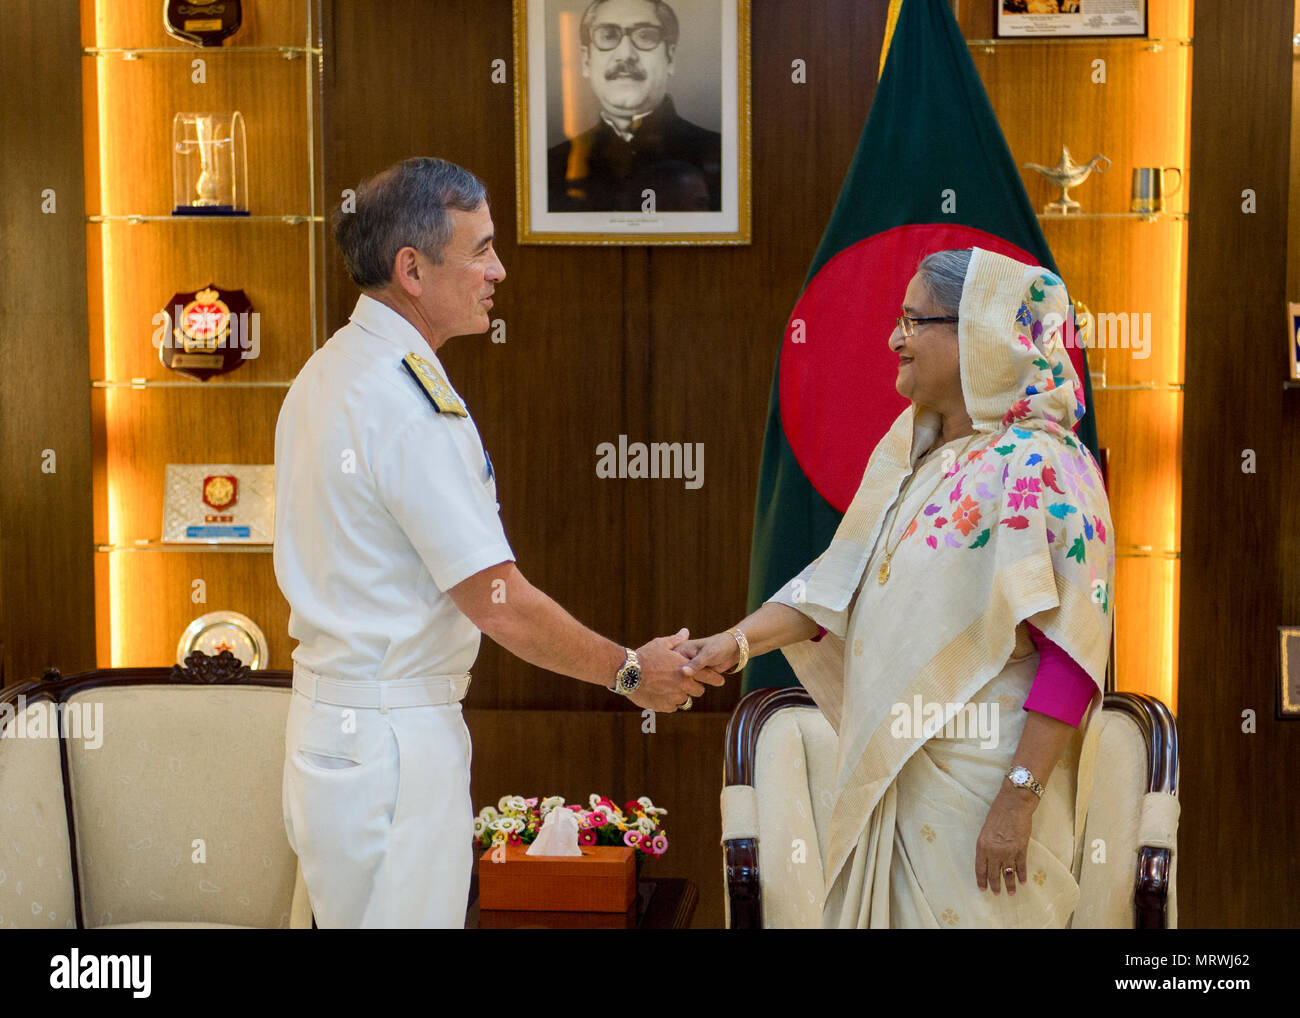 170709-N-WY954-136DHAKA, BANGLADESH (July 9, 2017) – Adm. Harry Harris, Commander U.S. Pacific Command (PACOM), meets with Prime Minister of Bangladesh Sheikh Hasina. This is Harris’ first visit to Bangladesh as PACOM commander. During the visit he met with counterparts and government officials for discussions on military cooperation and regional security initiatives in the Indo-Asia Pacific. (U.S. Navy photo by Mass Communications Specialist 2nd Class Robin W. Peak/ Released) Stock Photo